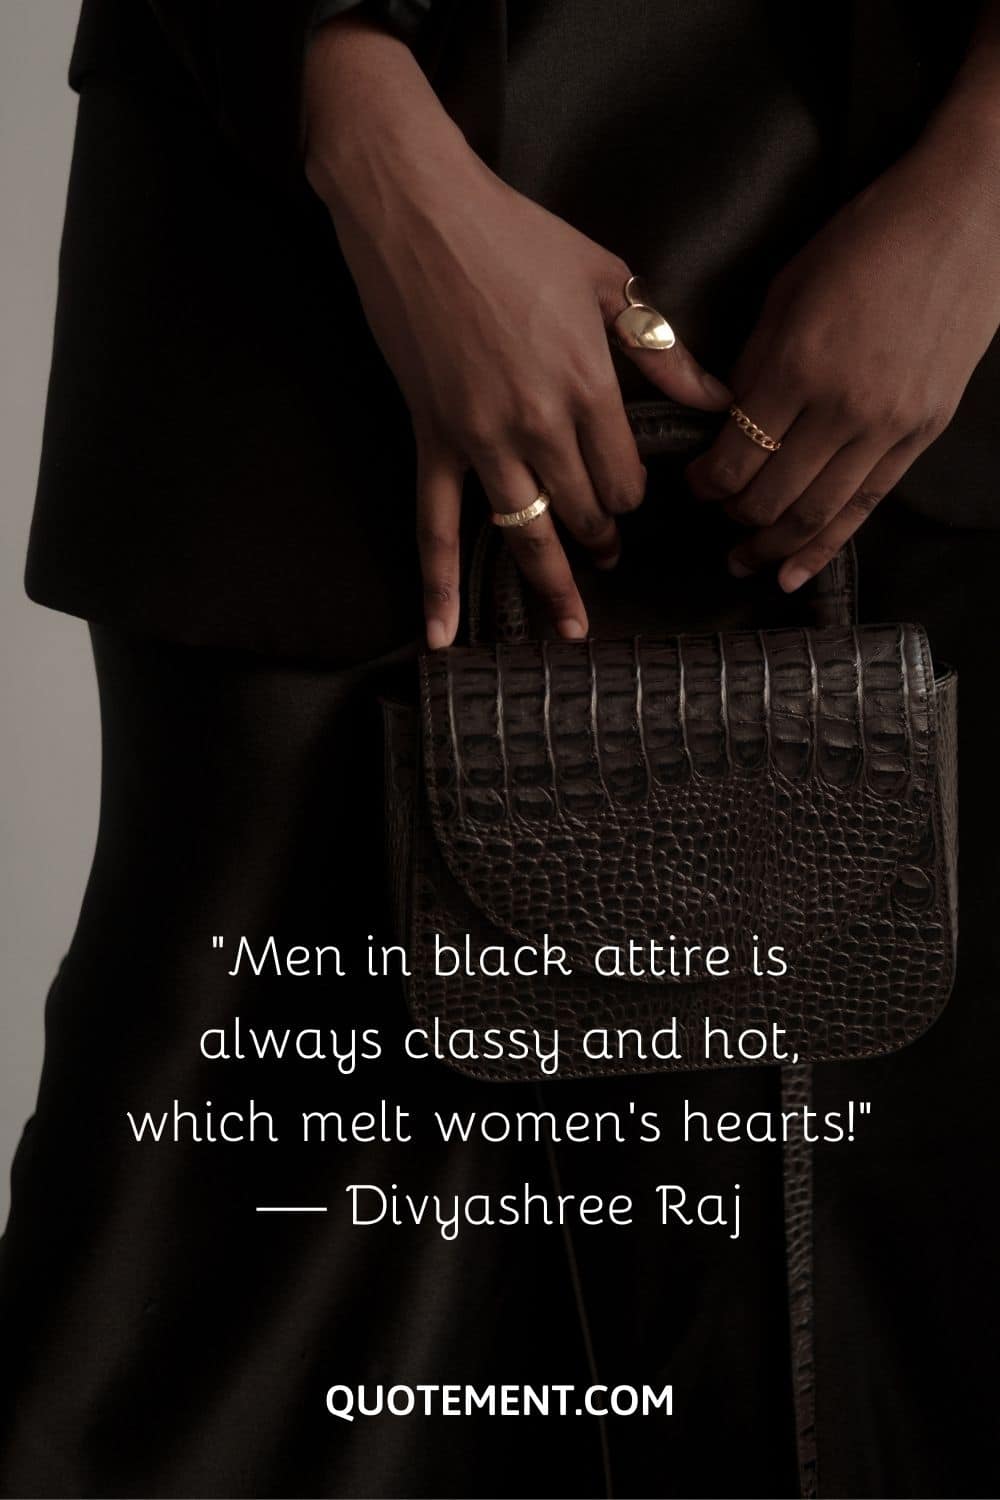 Men in black attire is always classy and hot, which melt women’s hearts!